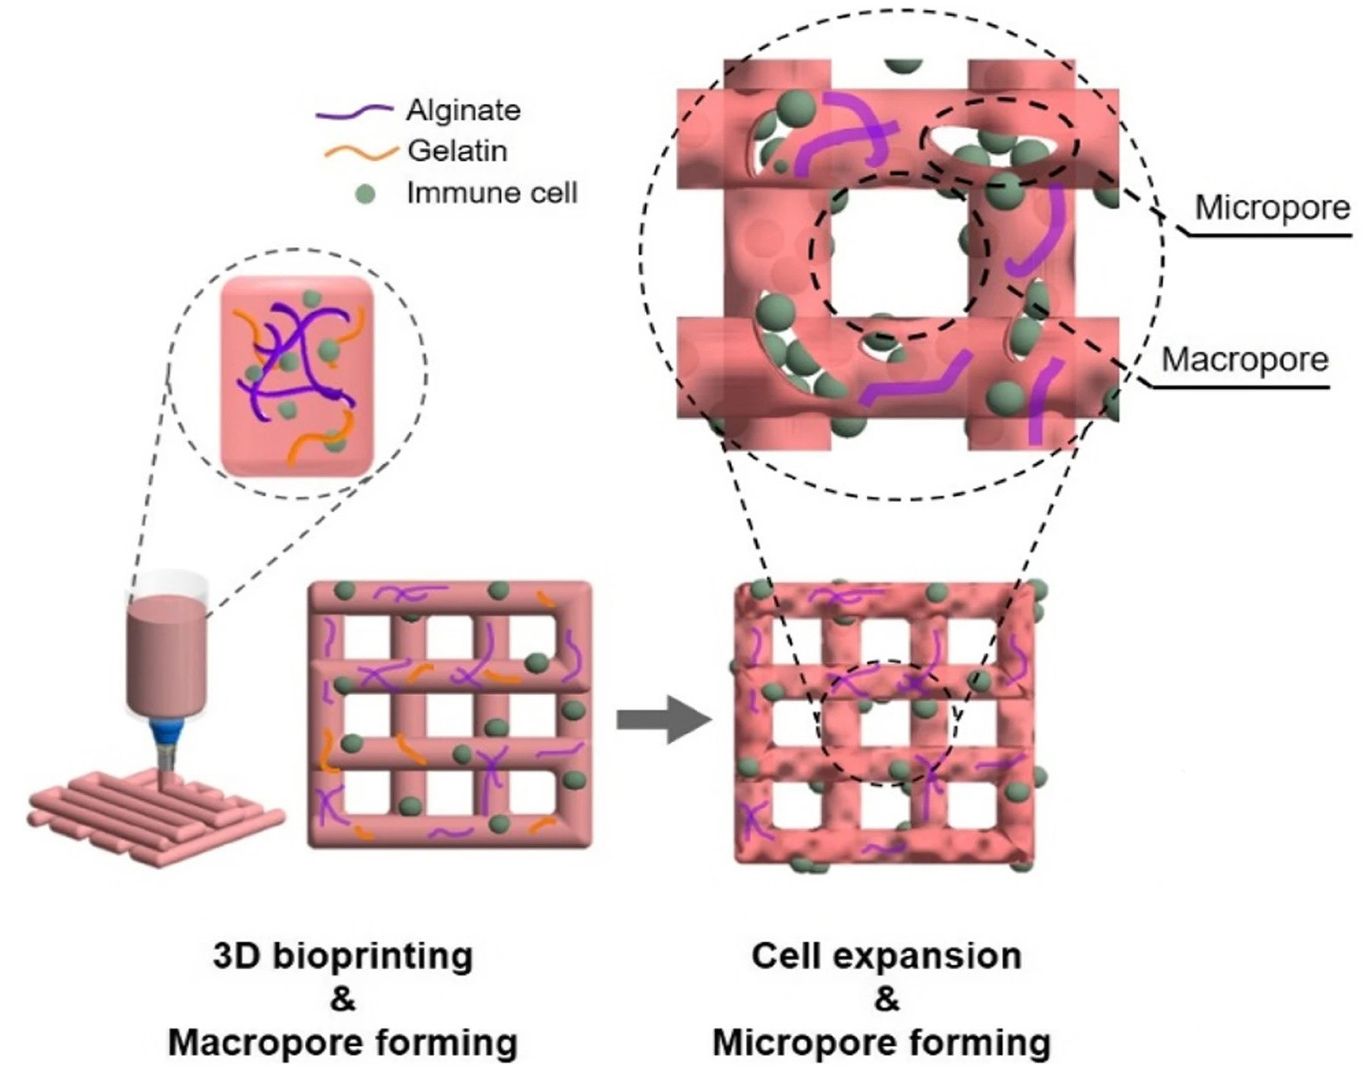 a diagram showing the 3D-printed hydrogels containing NK cells